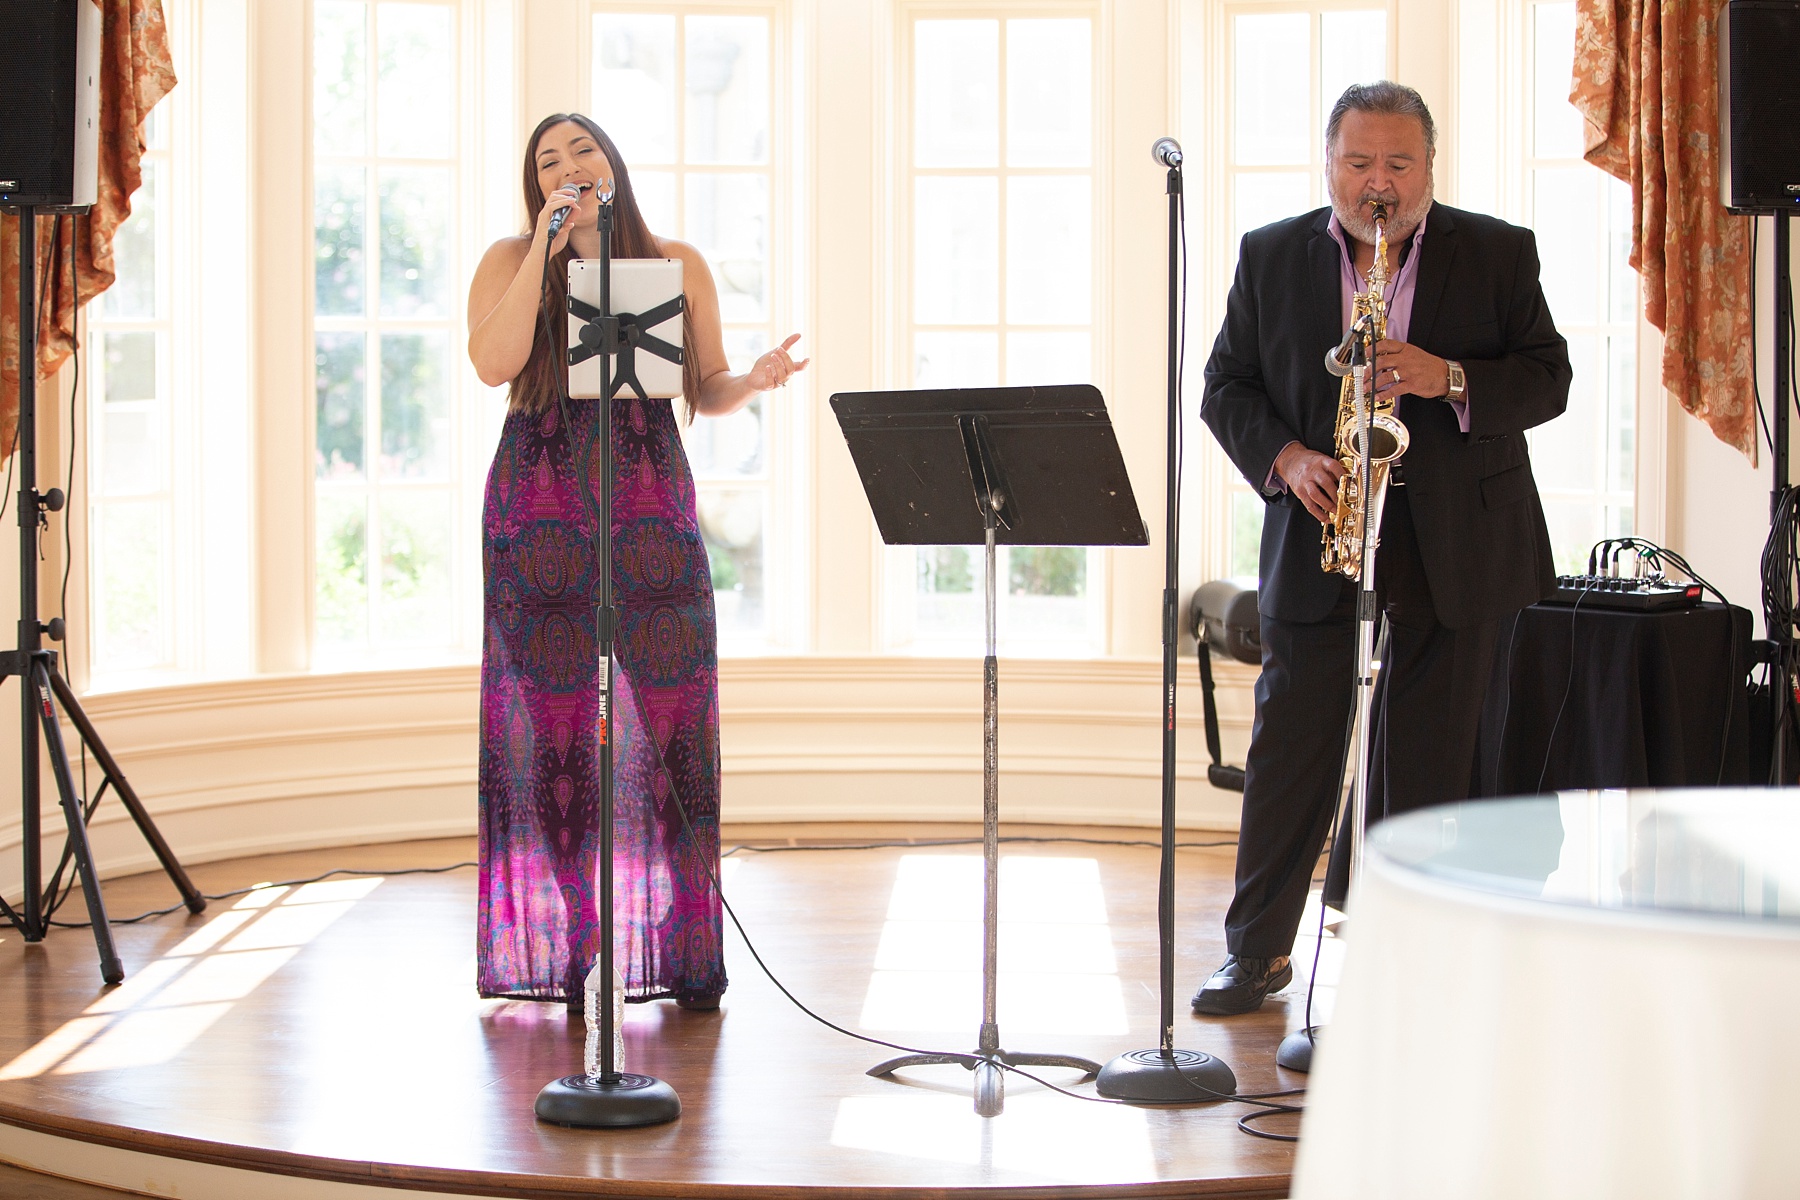 singer and saxaphone duet sing during cocktail hour